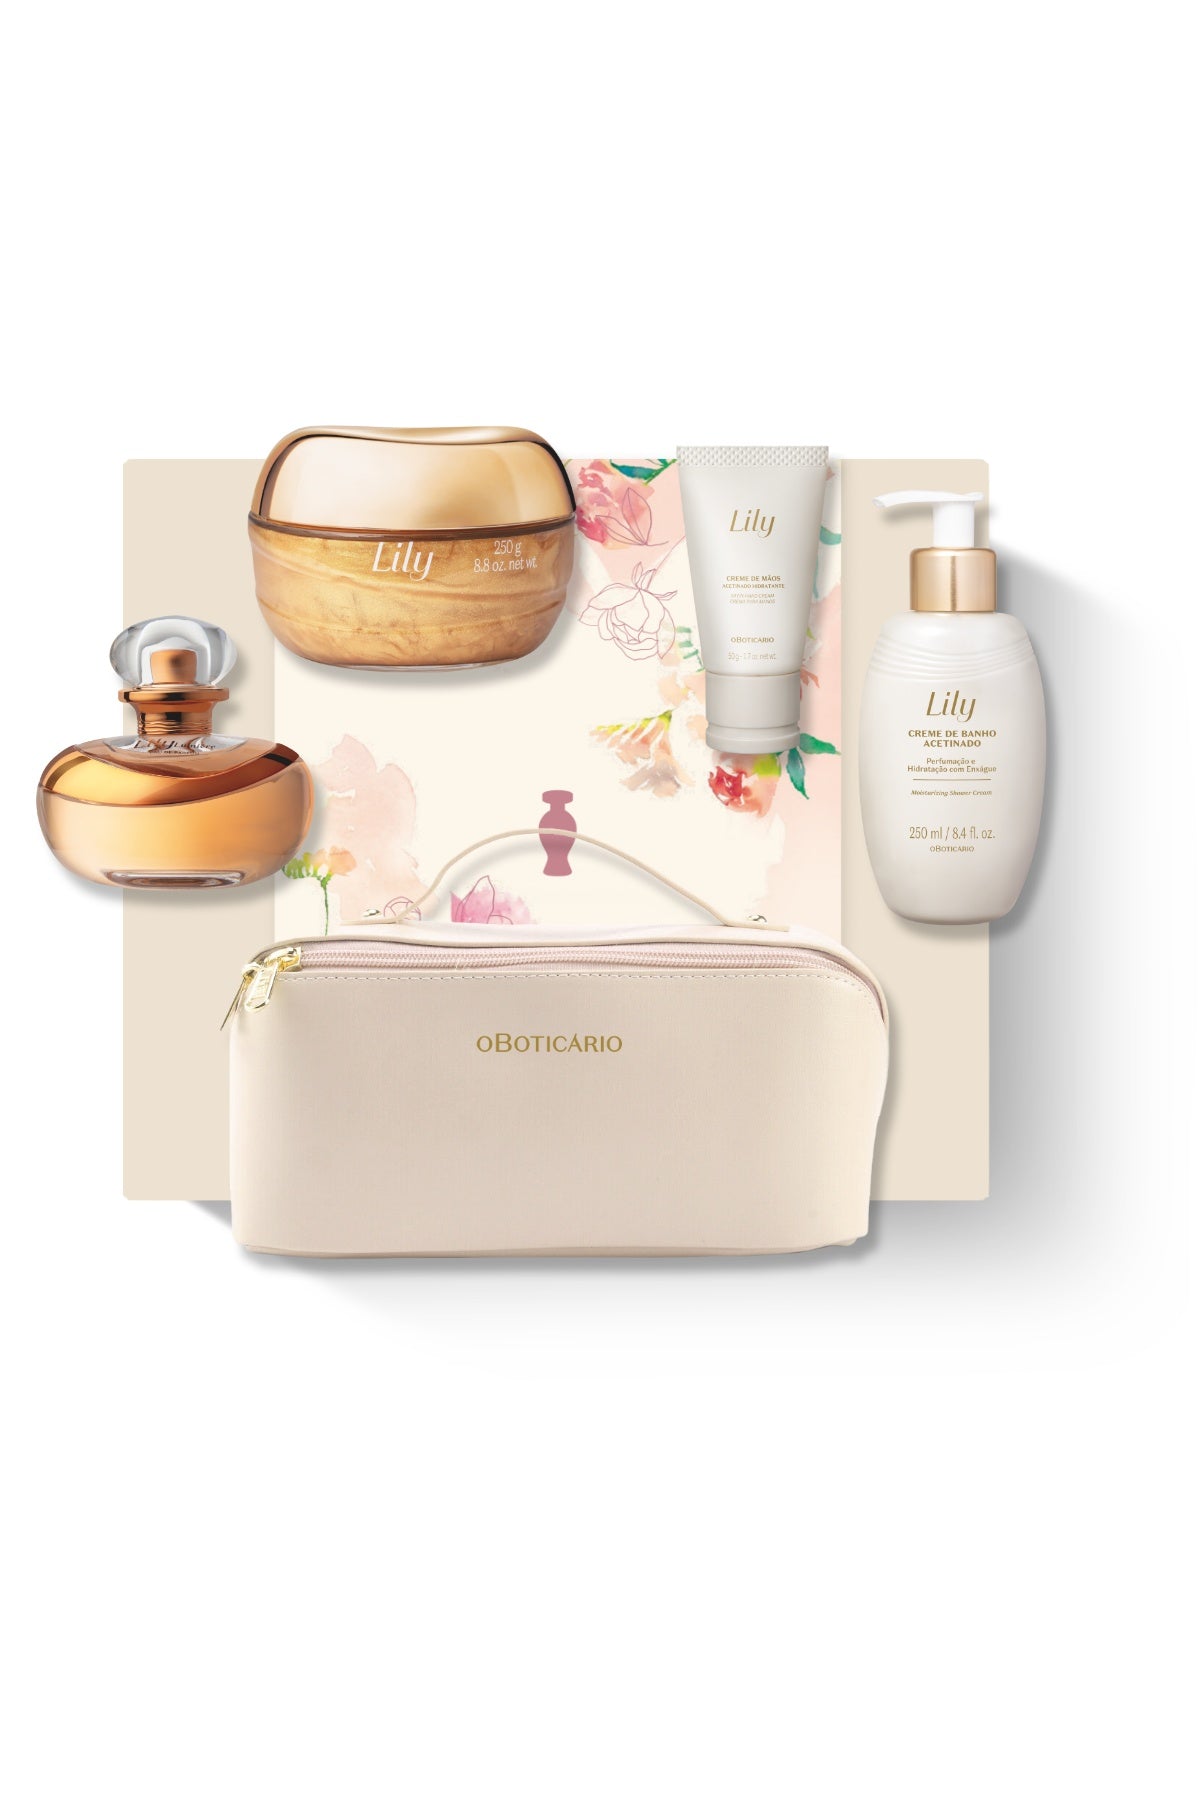 Lily Light Up Luxury Mother's Day Gift Set - O Boticário US -Lily-Gifts